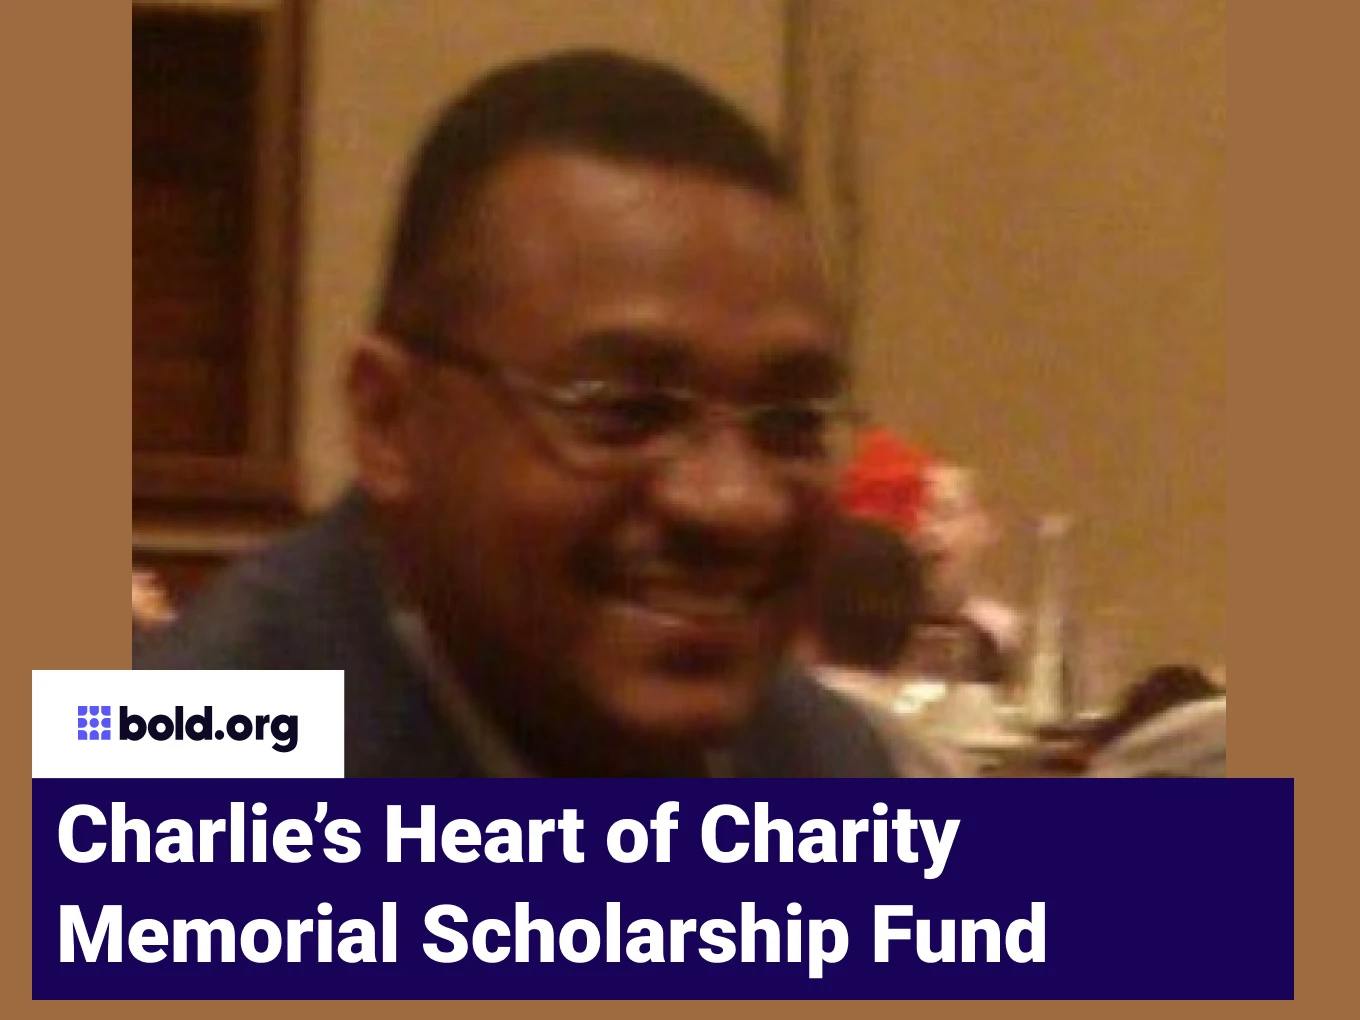 Charlie’s Heart of Charity Memorial Scholarship Fund